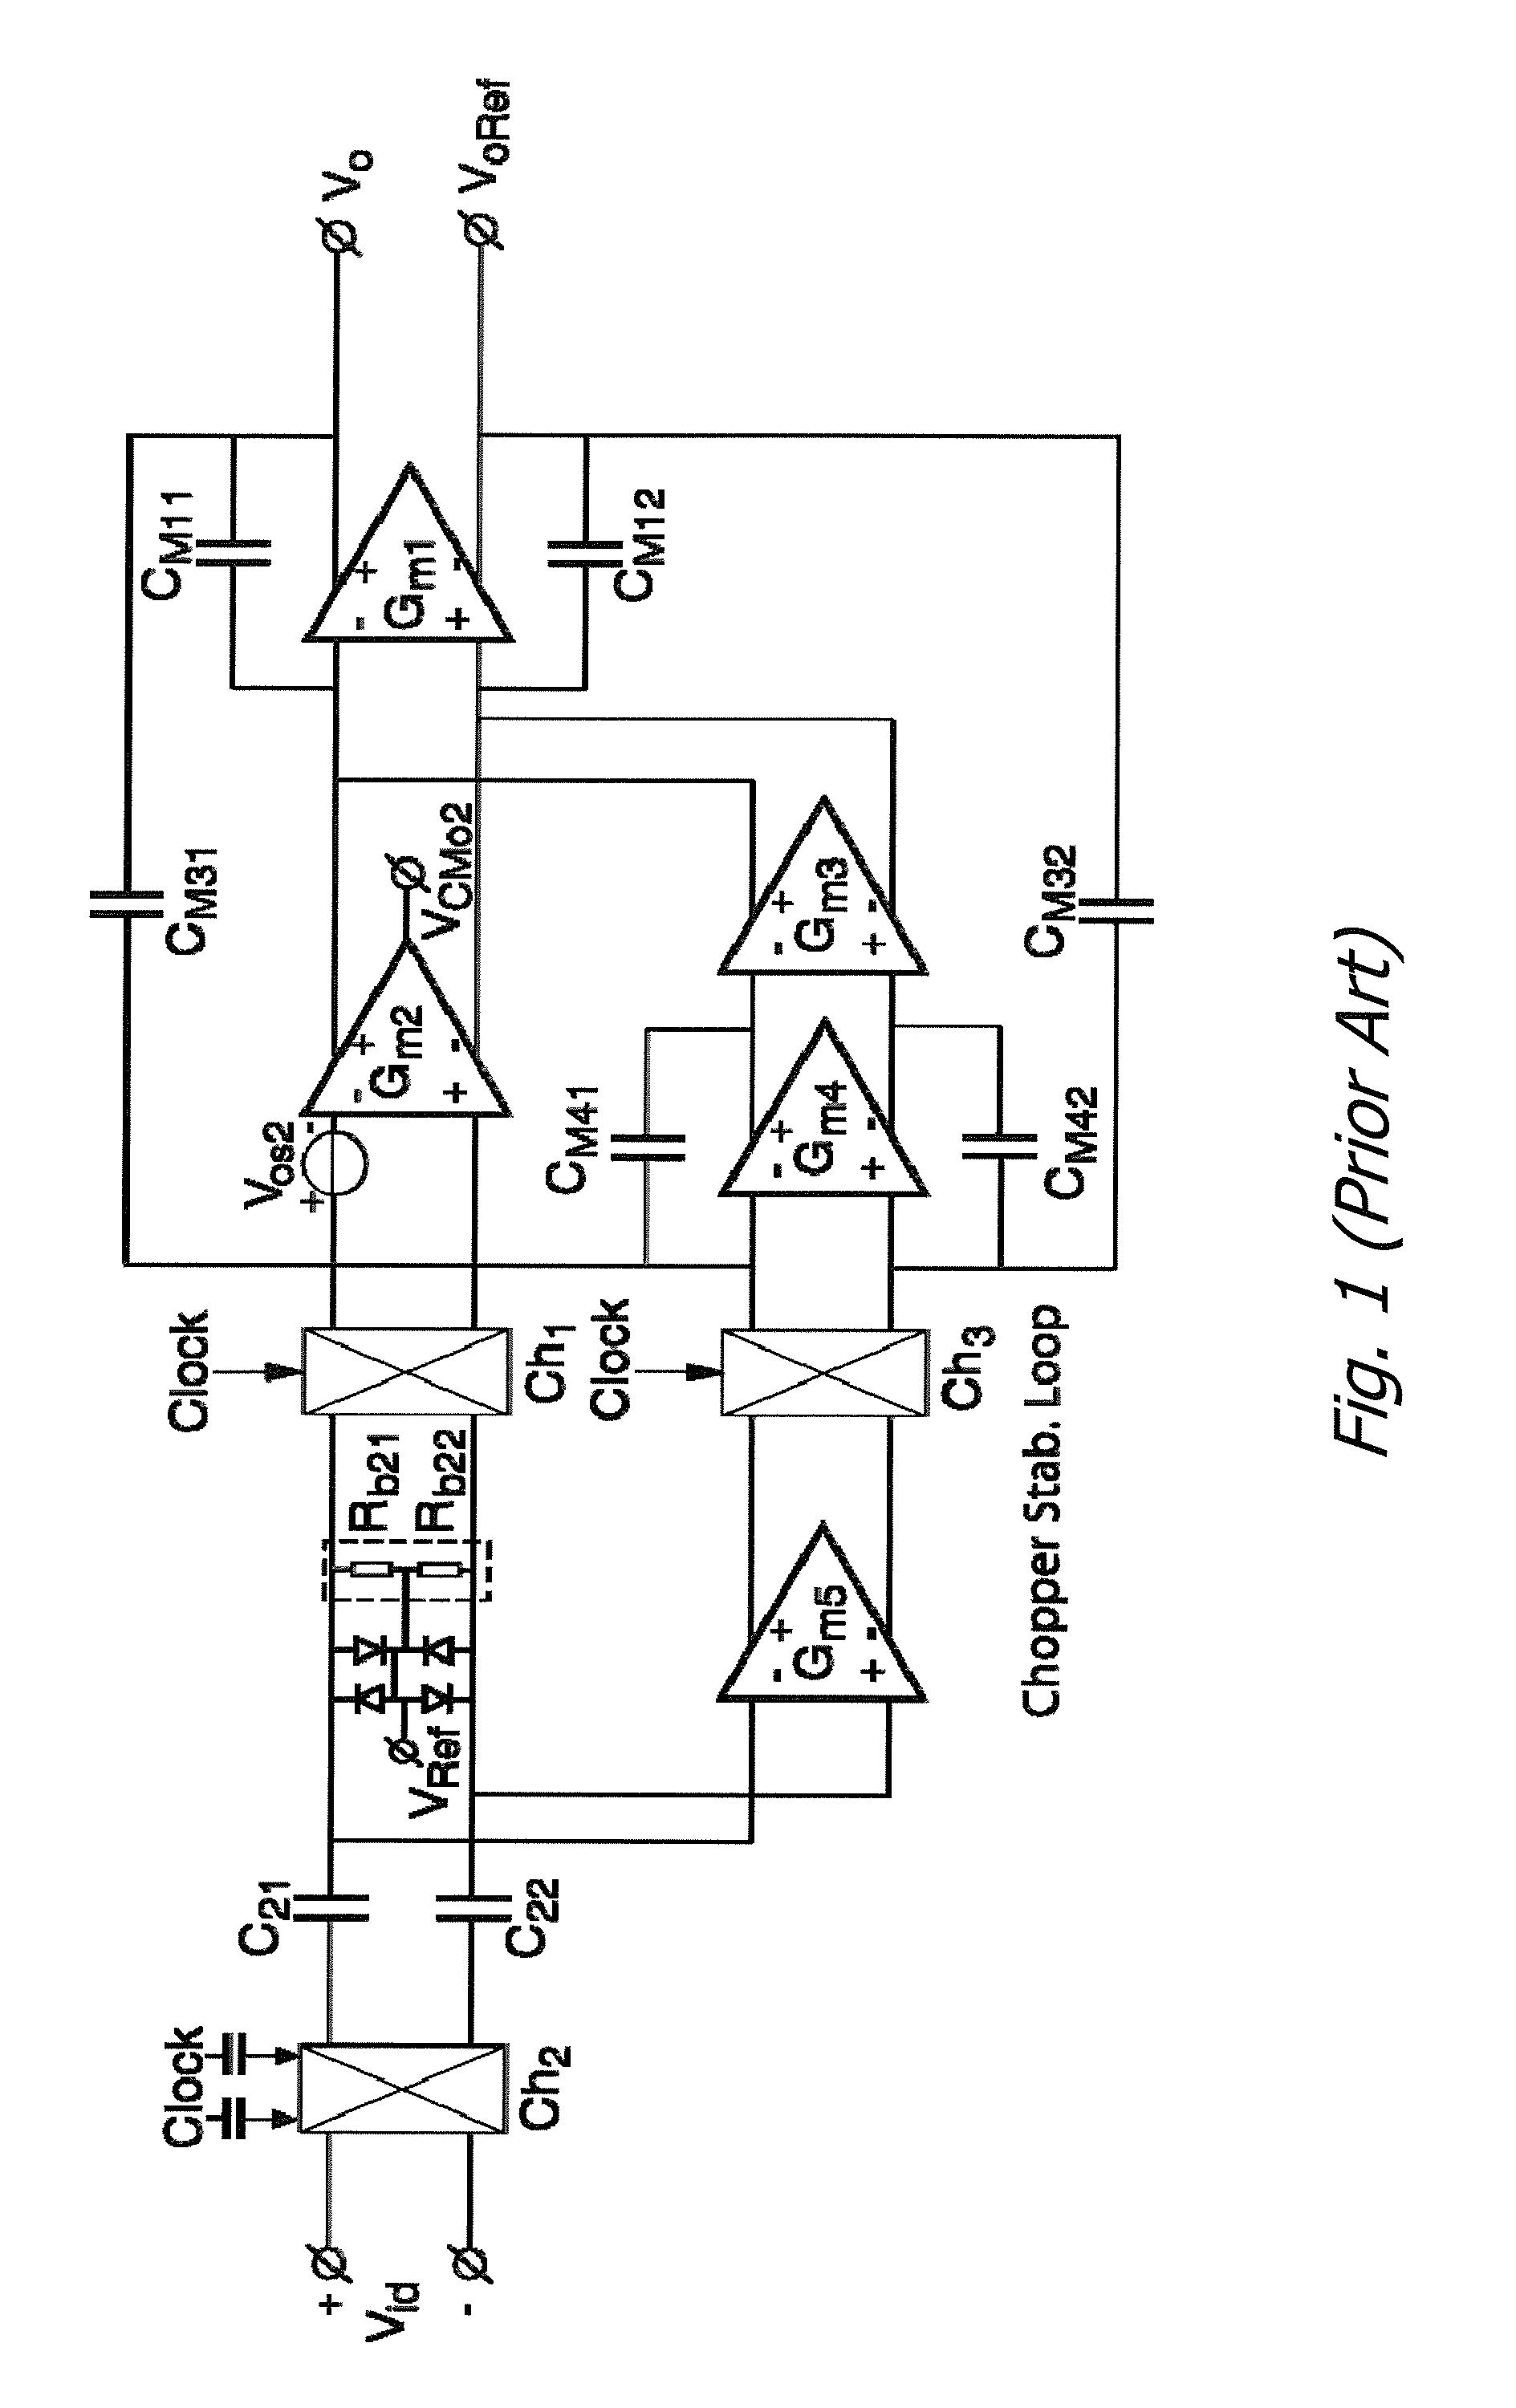 Fast-Settling Capacitive-Coupled Amplifiers